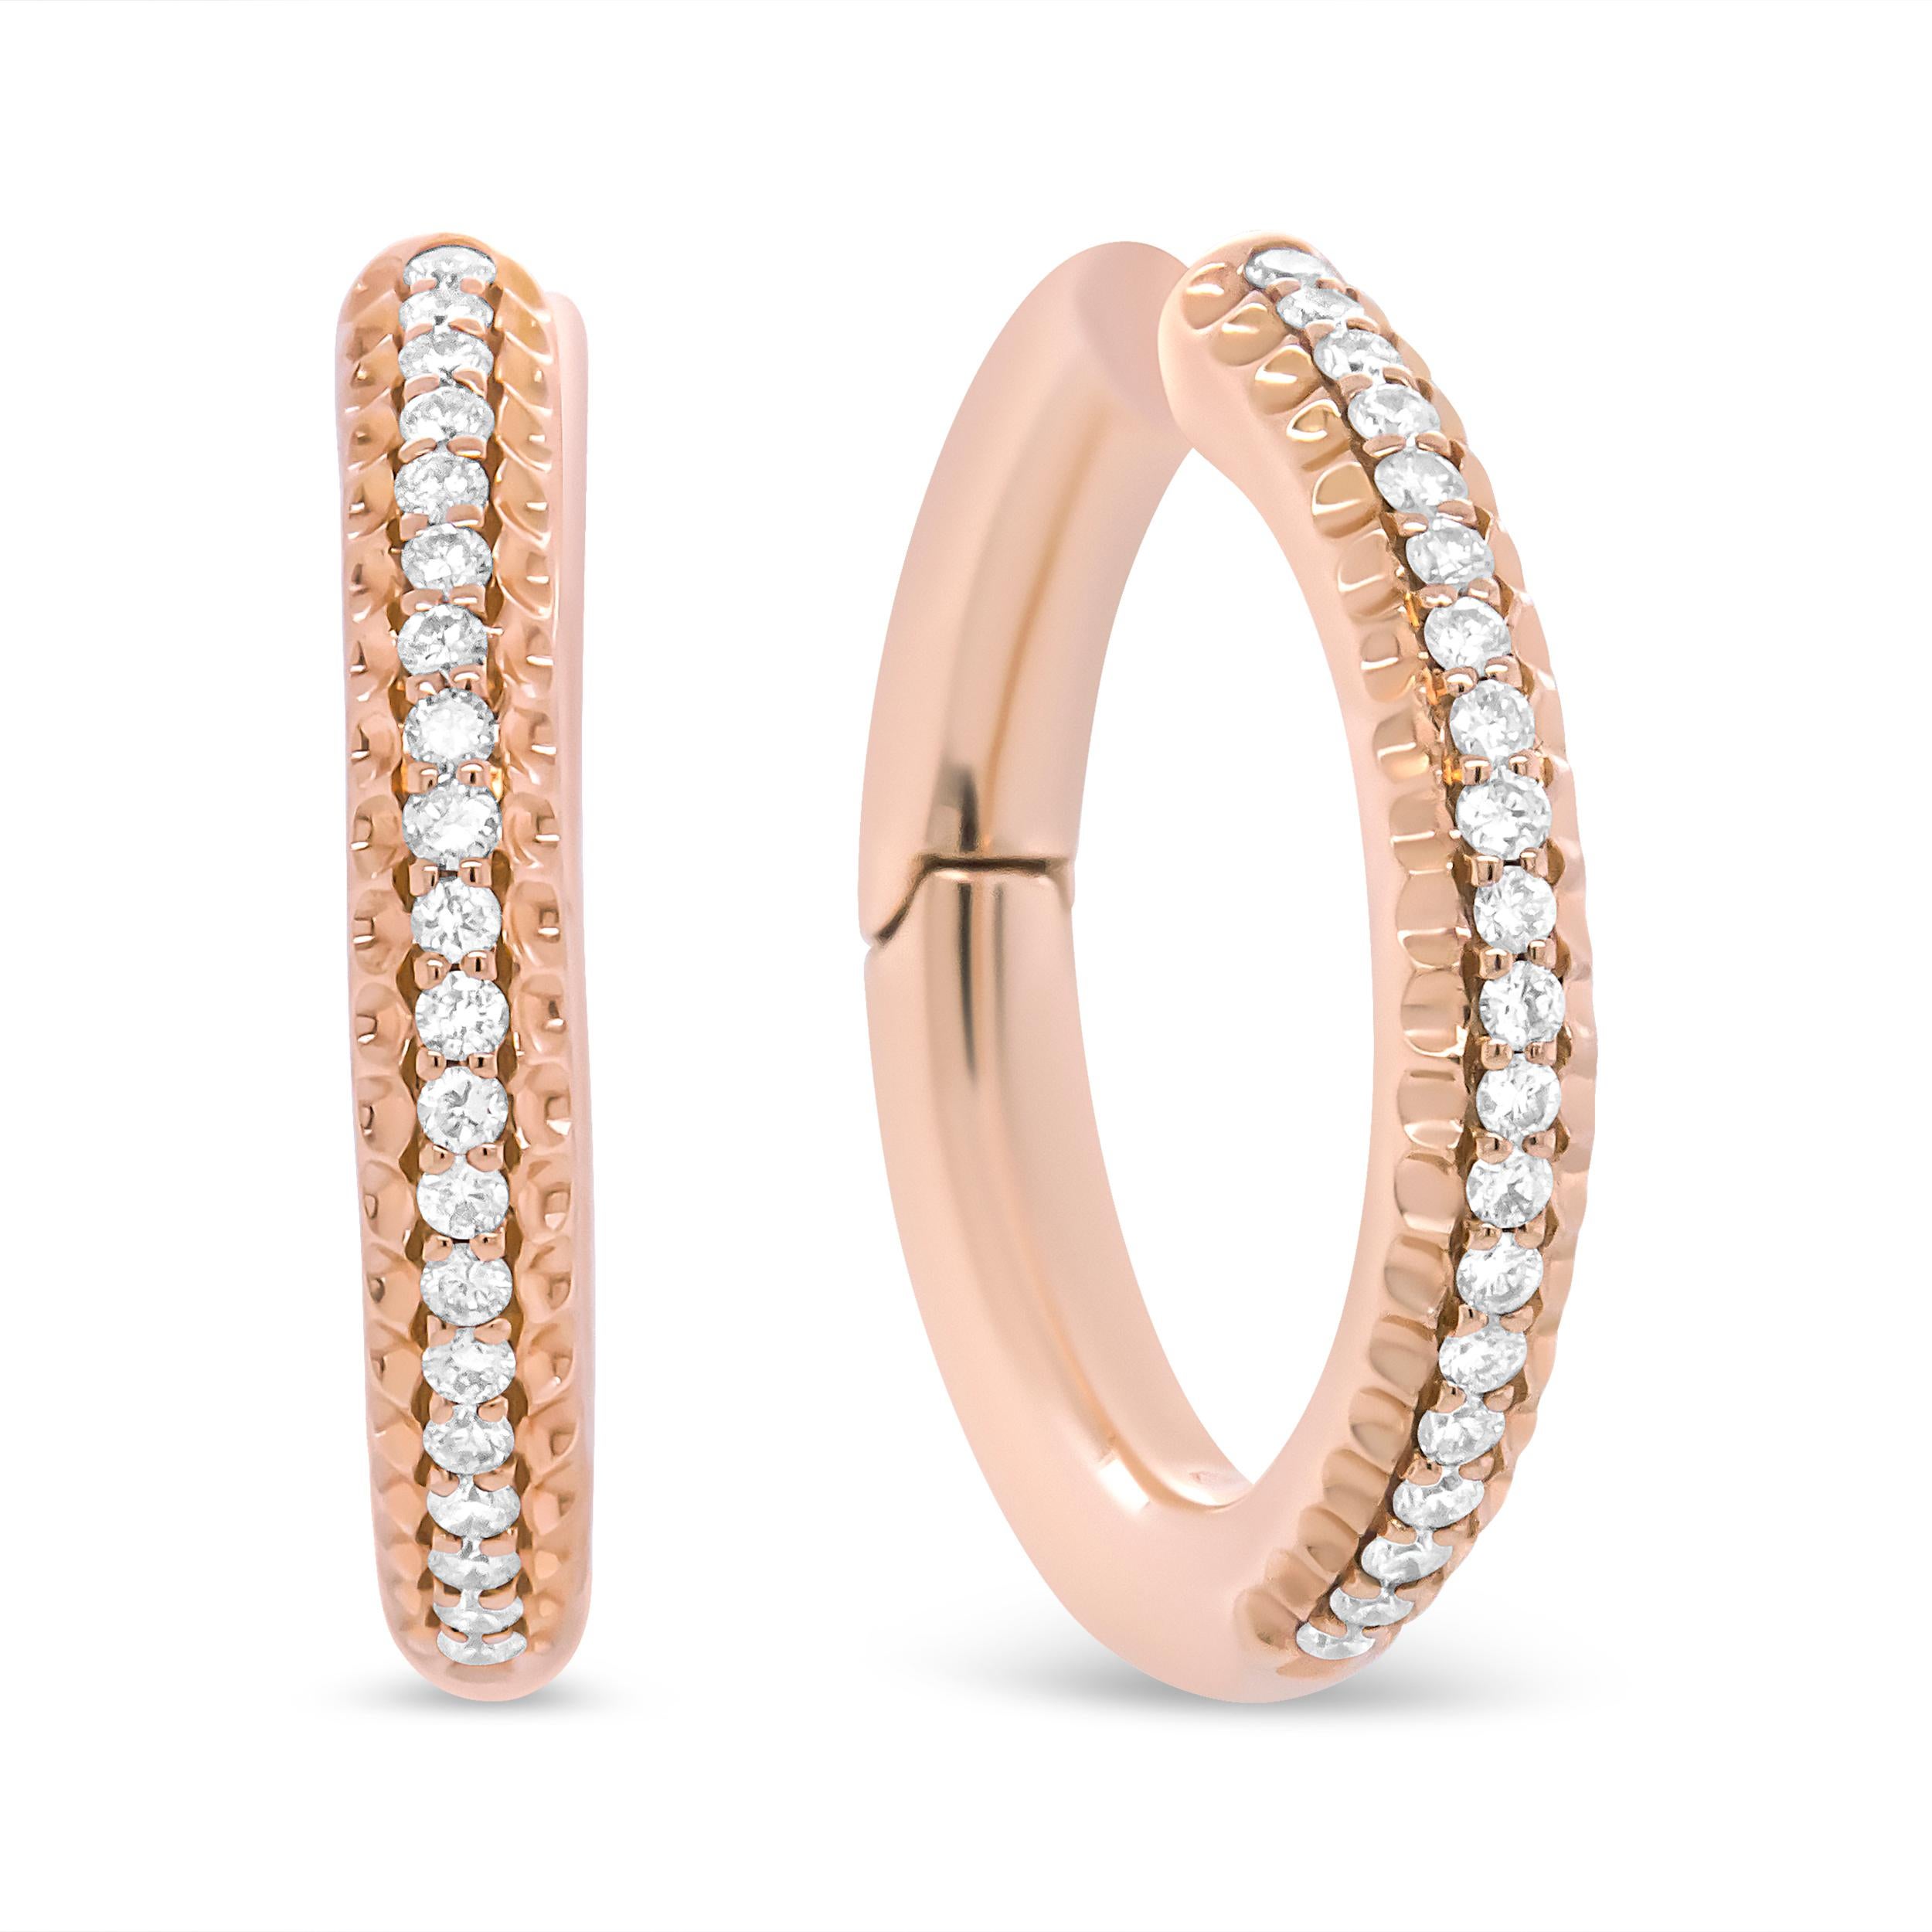 A timeless look, hoops are a fashion statement that are enduring. Diamonds likewise are eternal in their coveted style, making these 18k rose gold hoops an instant stunner for all of your everyday and special occasion ensembles! A row of fine white